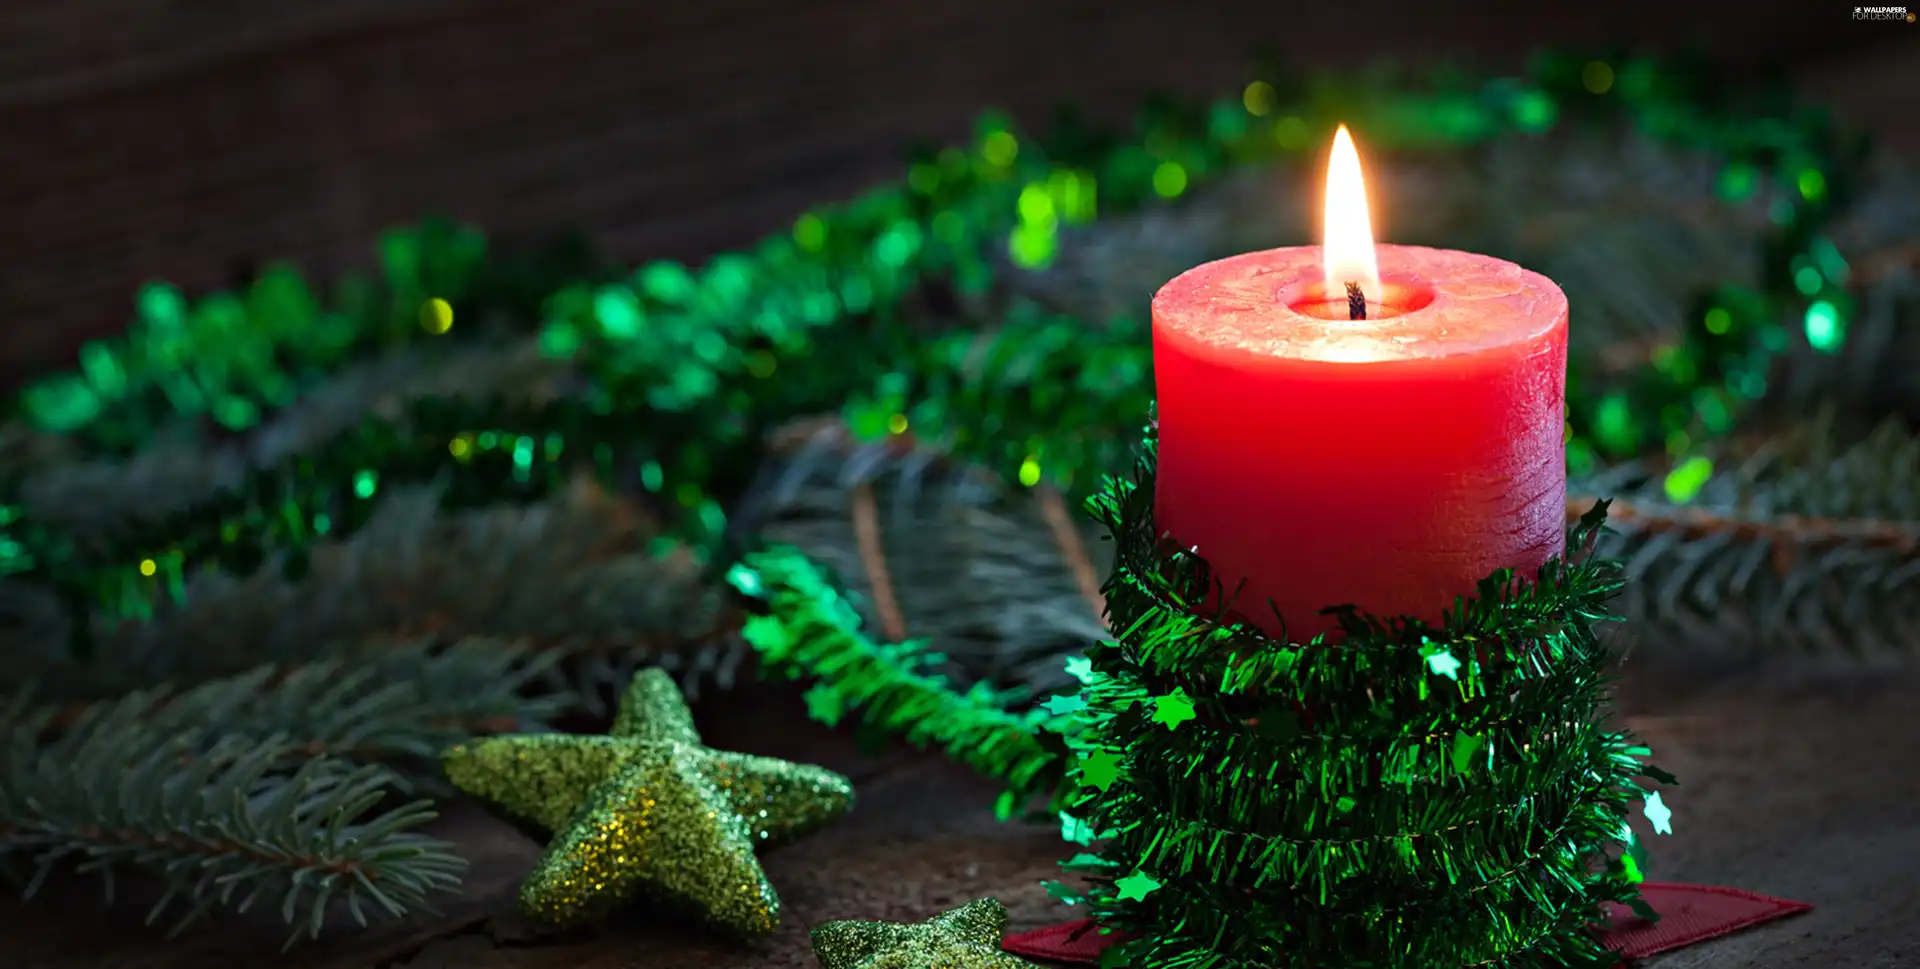 Candle, star, decoration, red hot, christmas